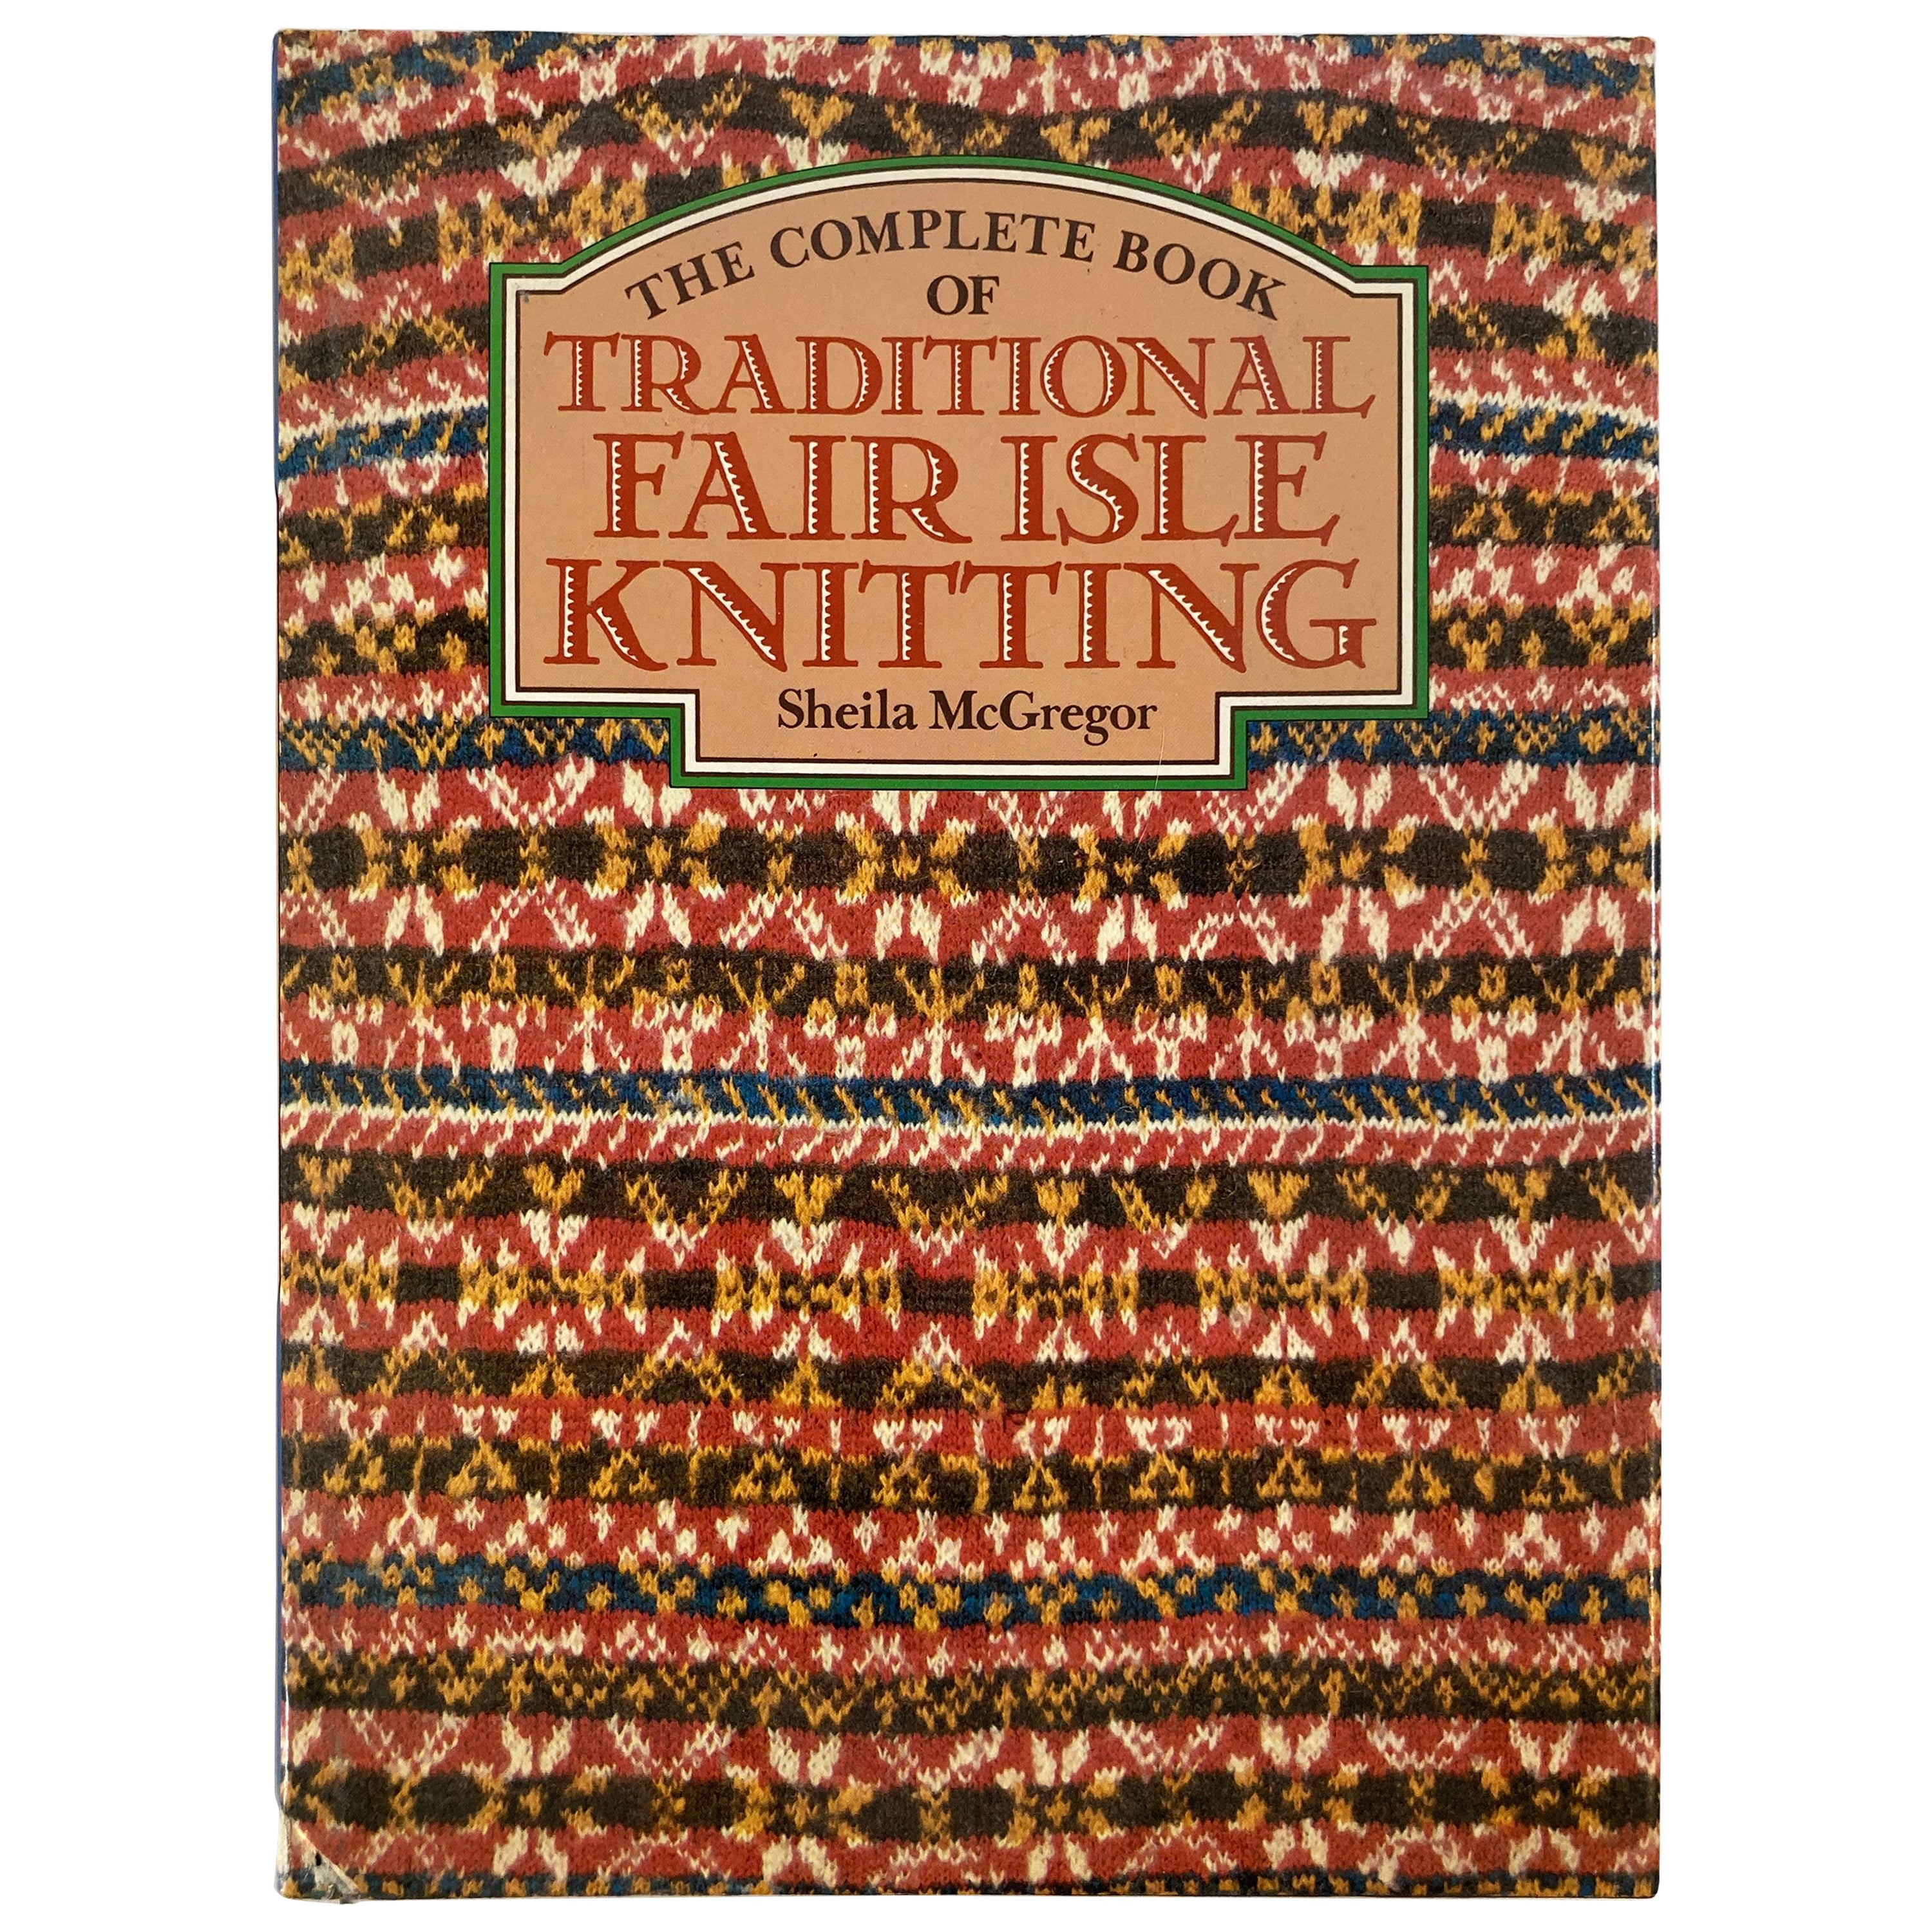 Complete Book of Traditional Fair Isle Knitting by McGregor, Sheila 1982 For Sale